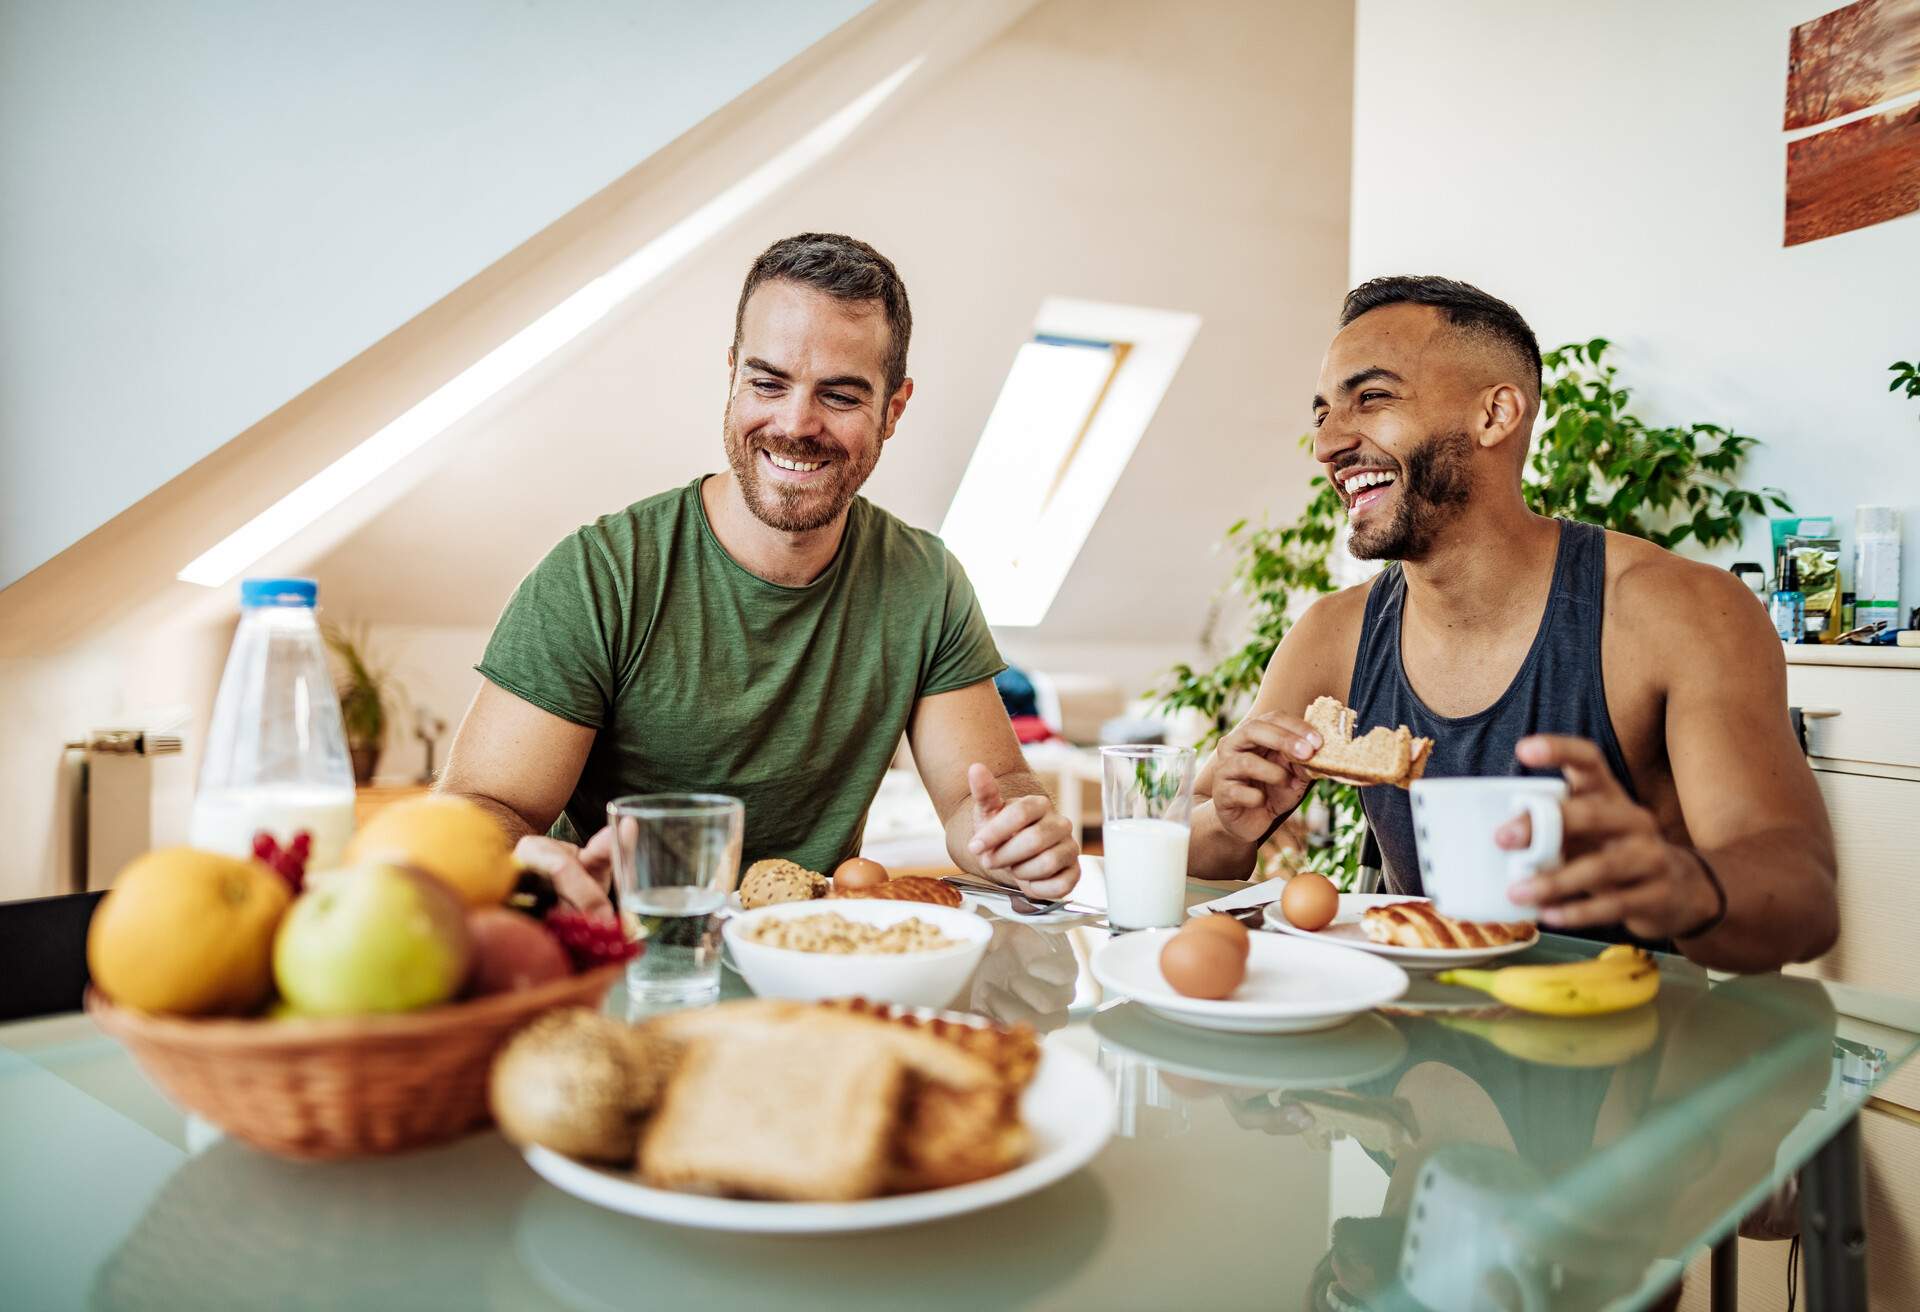 A gay couple shares a joyful breakfast at home, laughing and cherishing each other's company.